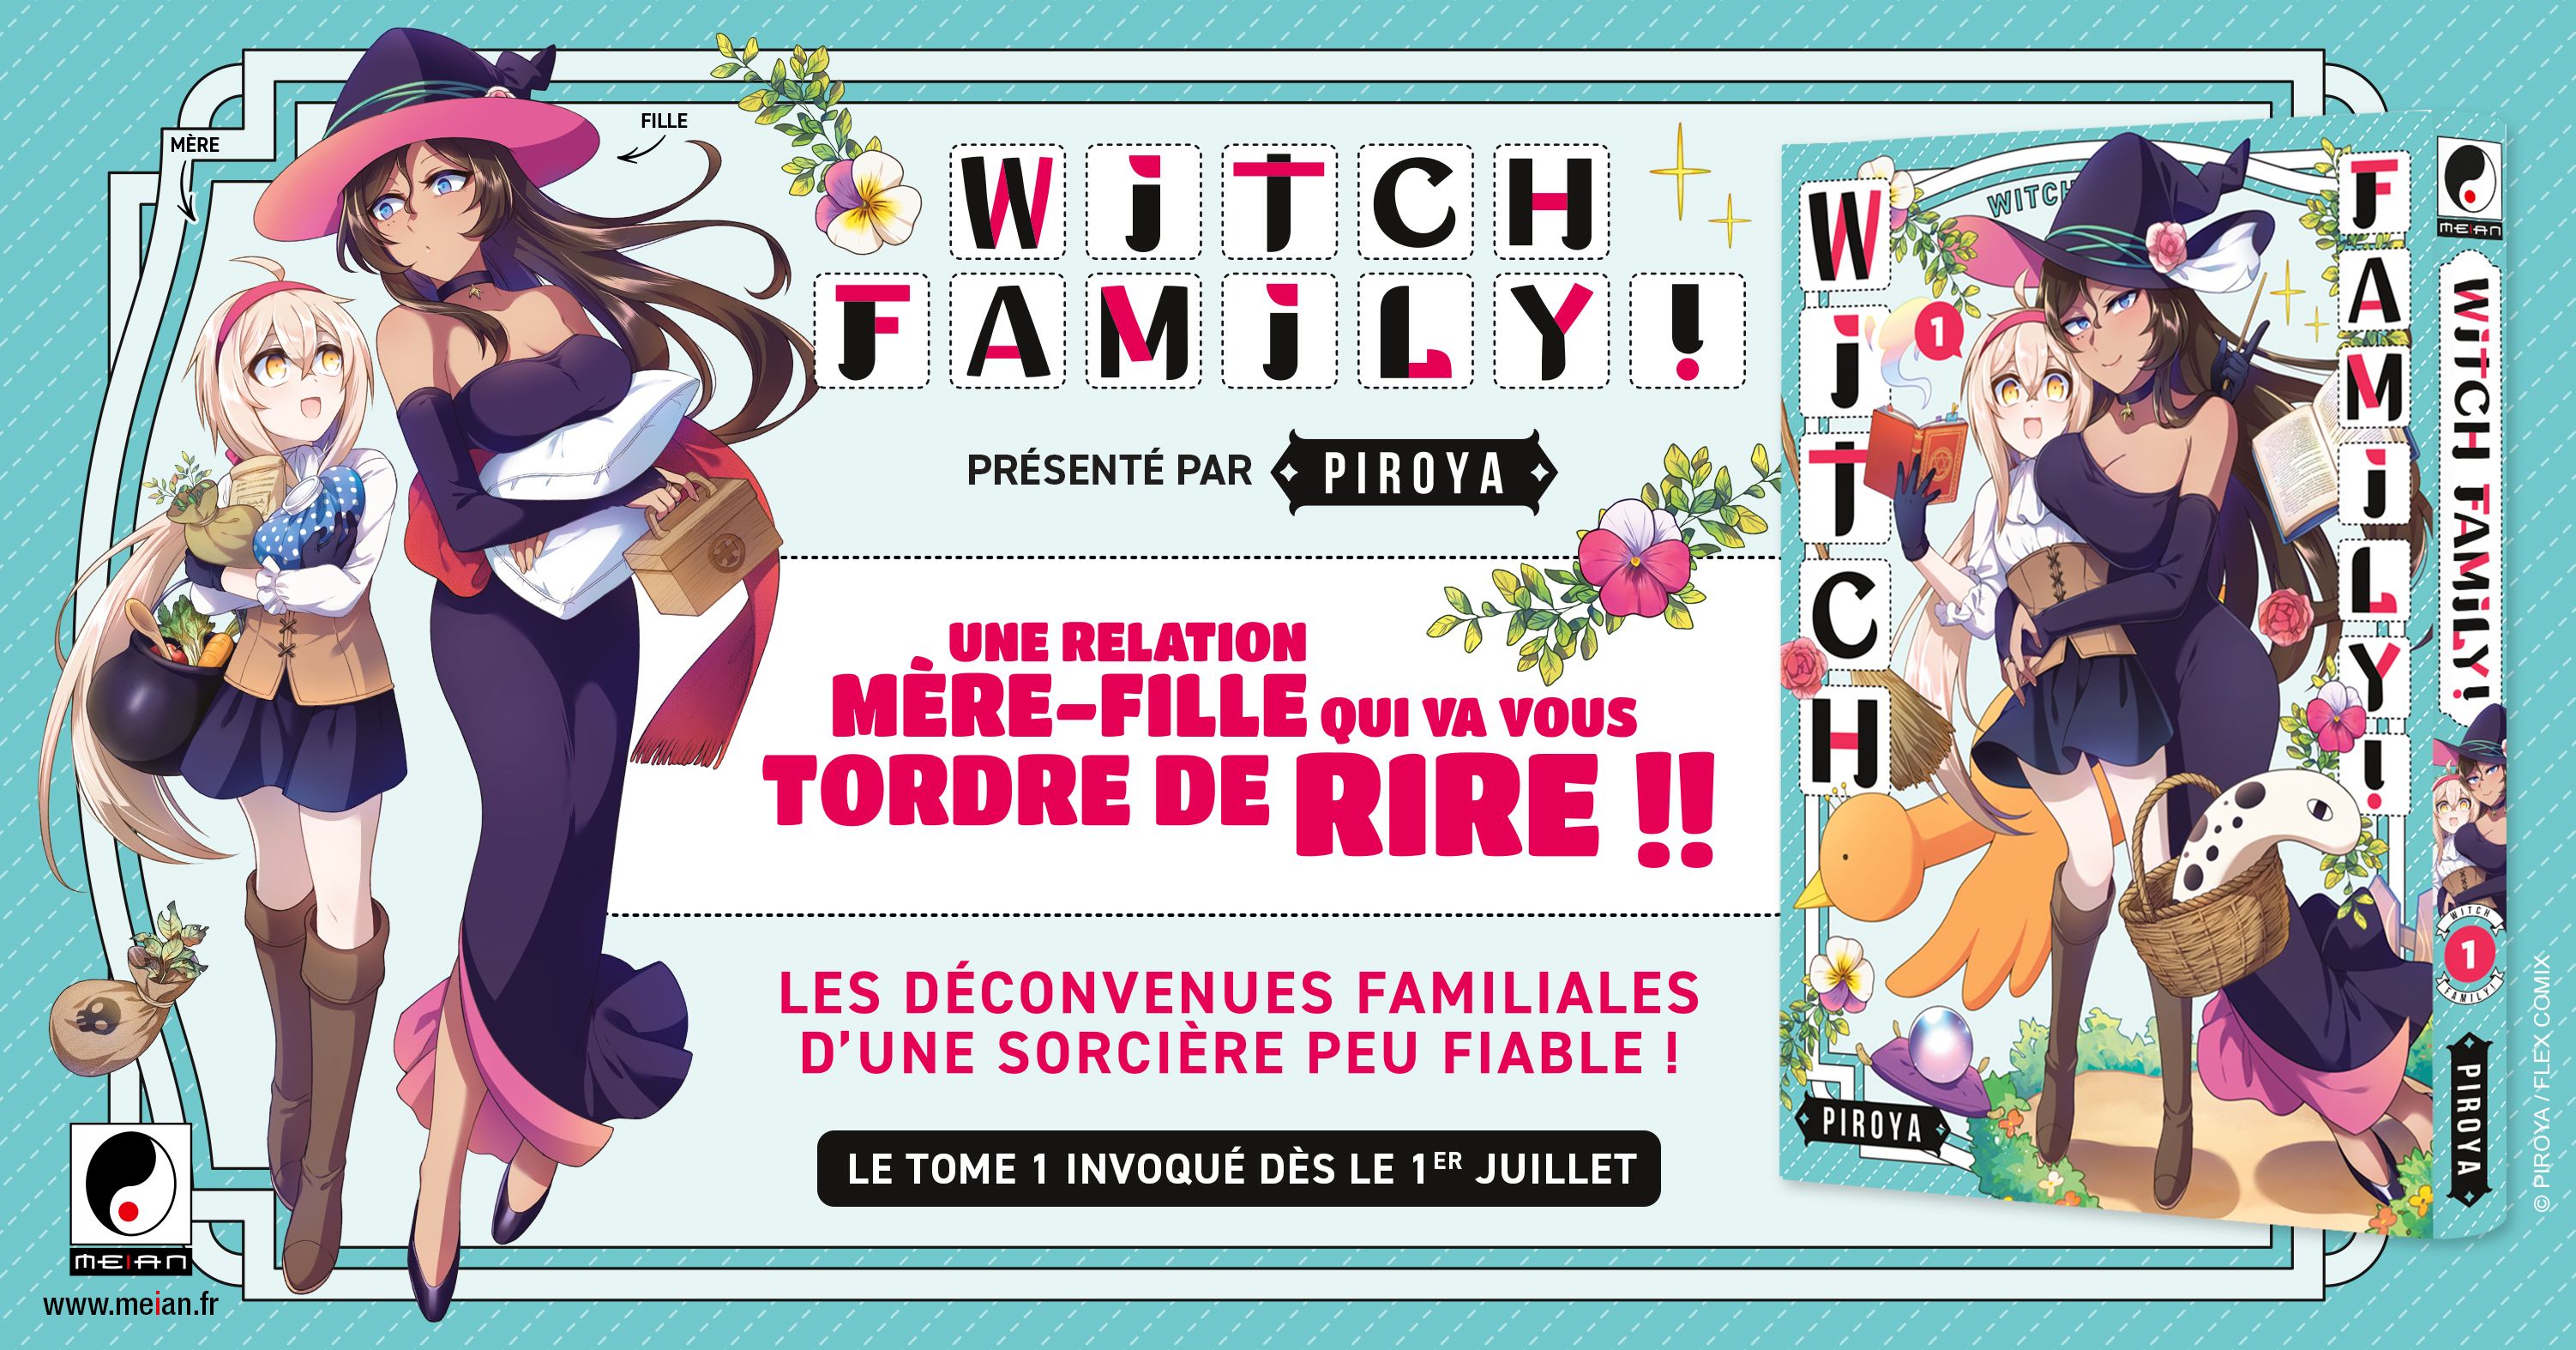 Witch_Family_annonce_meian.jpg